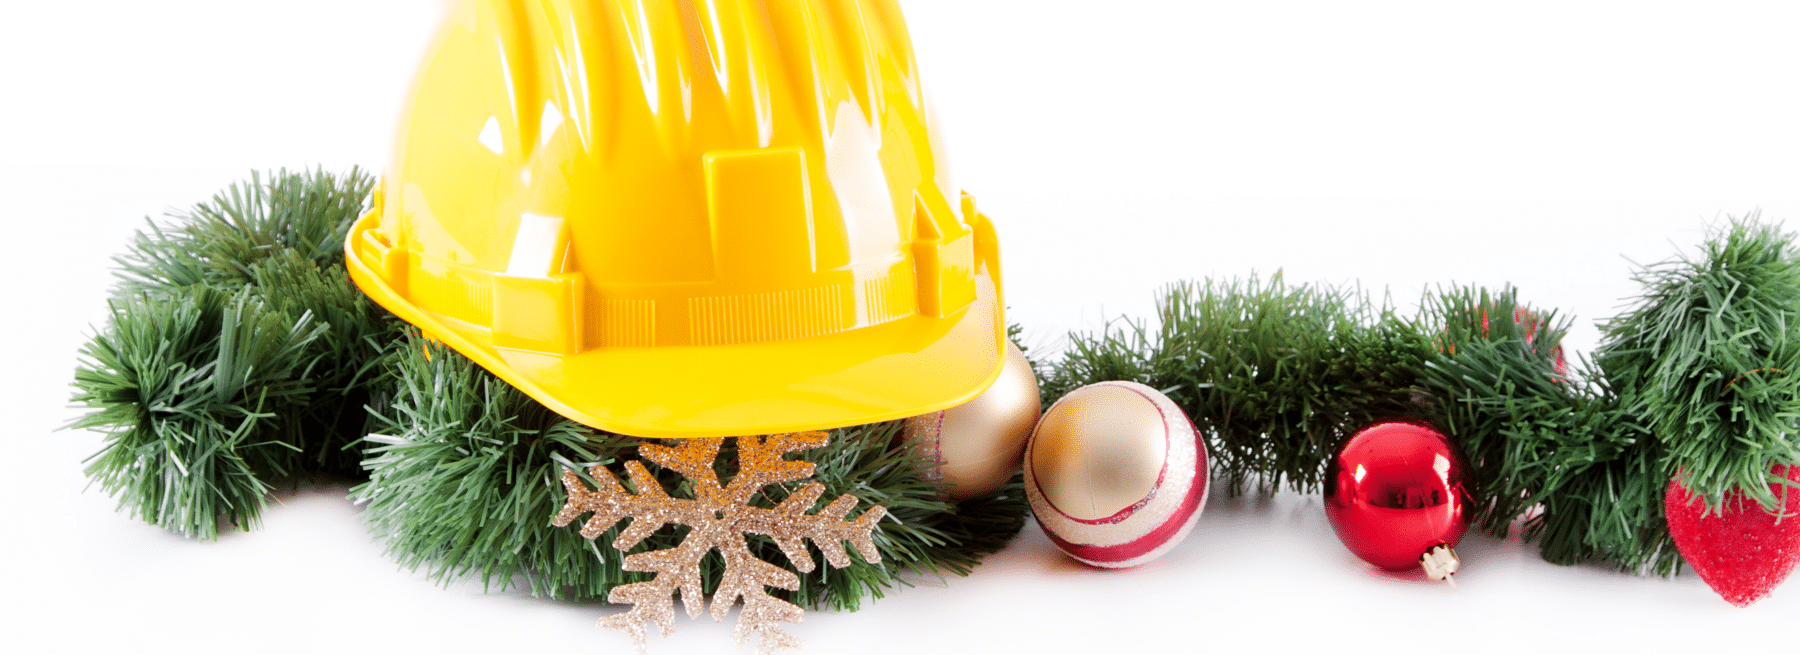 Protect Construction Site This Holiday